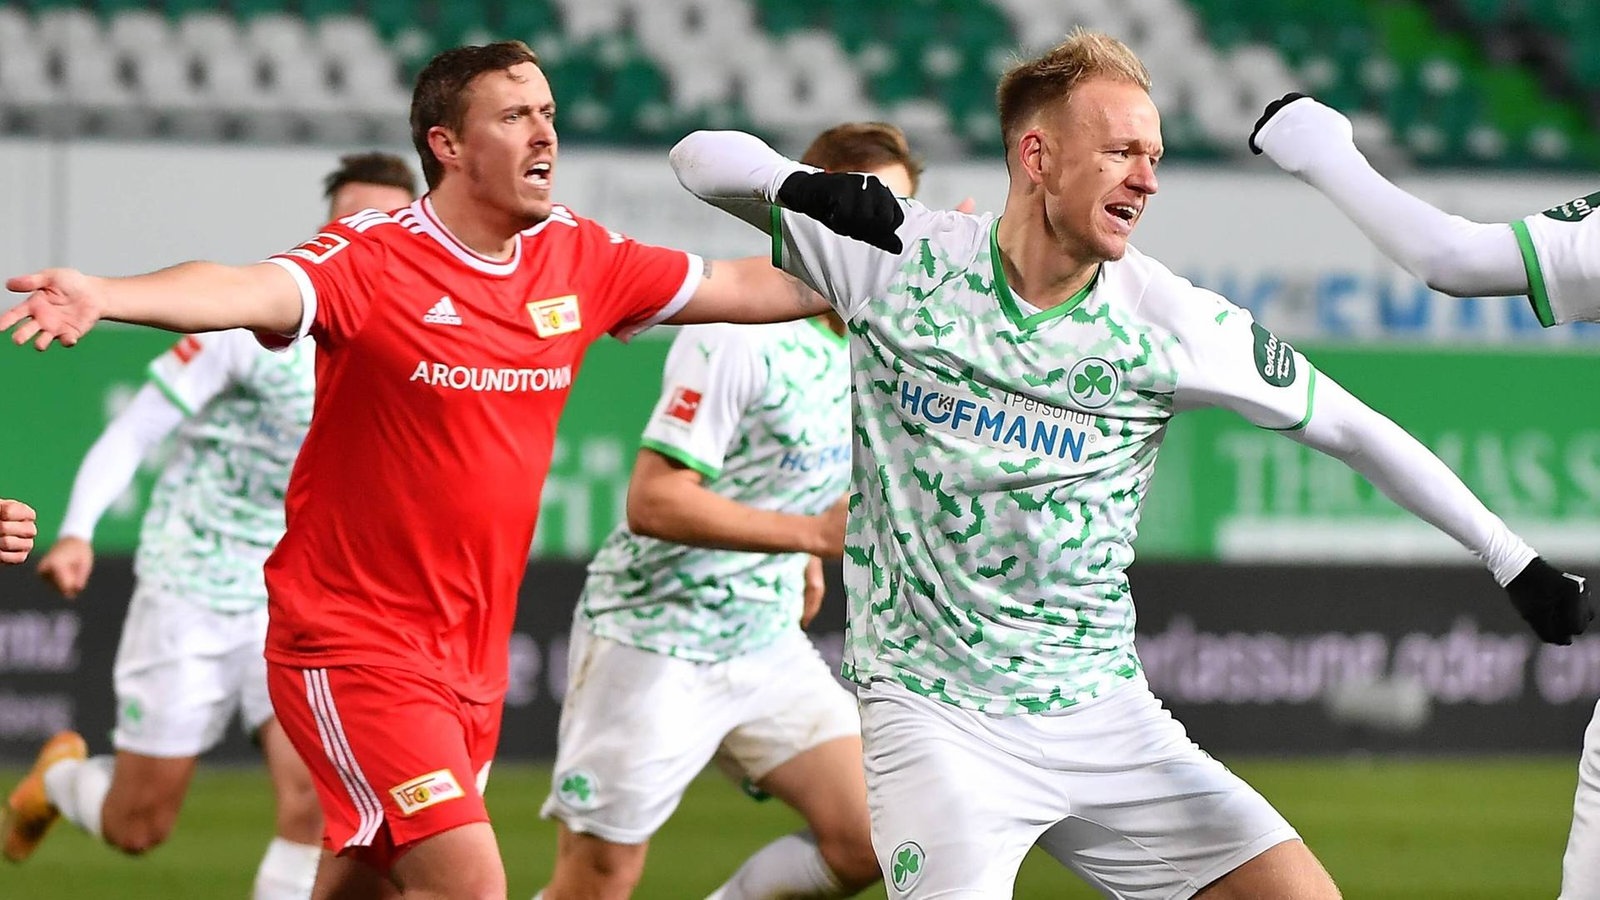 soi-keo-union-berlin-vs-spvgg-greuther-furth-vao-1h30-ngay-30-4-2022-1